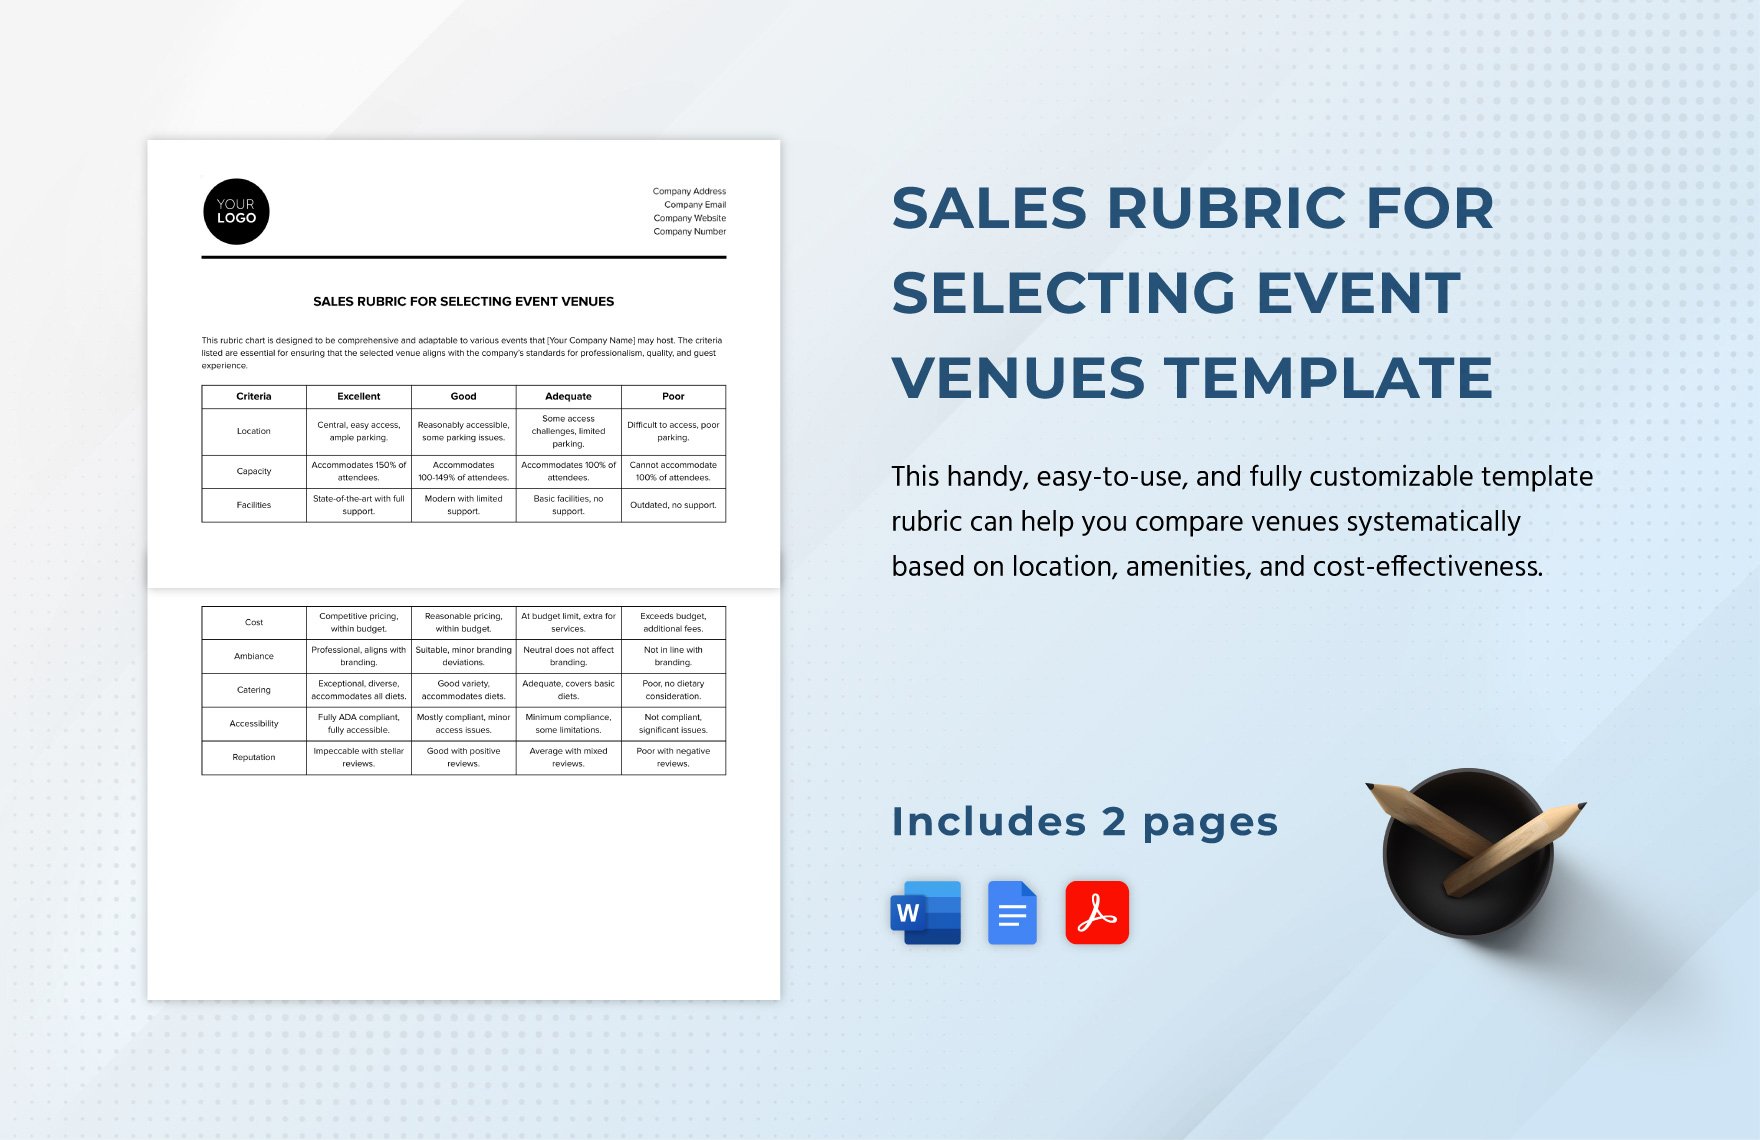 Sales Rubric for Selecting Event Venues Template in Word, Google Docs, PDF